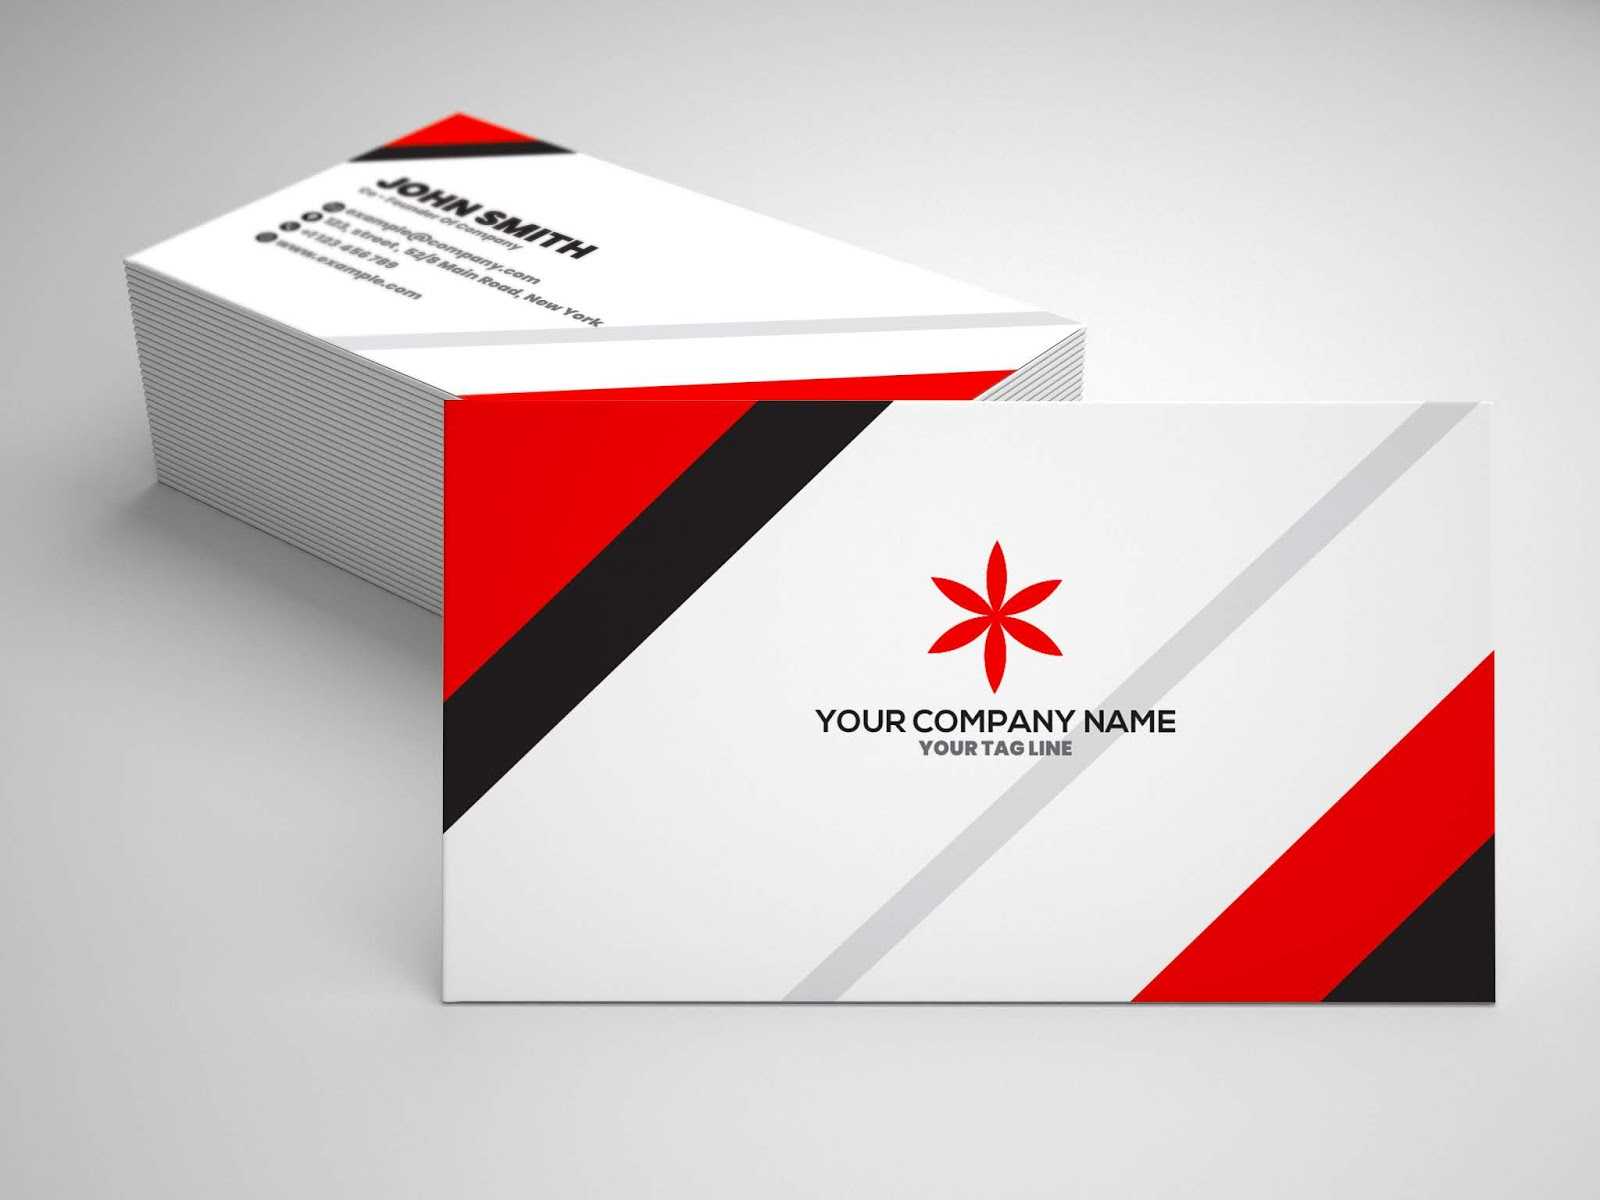 How To Make Double Sided Business Cards In Illustrator With Regard To Double Sided Business Card Template Illustrator